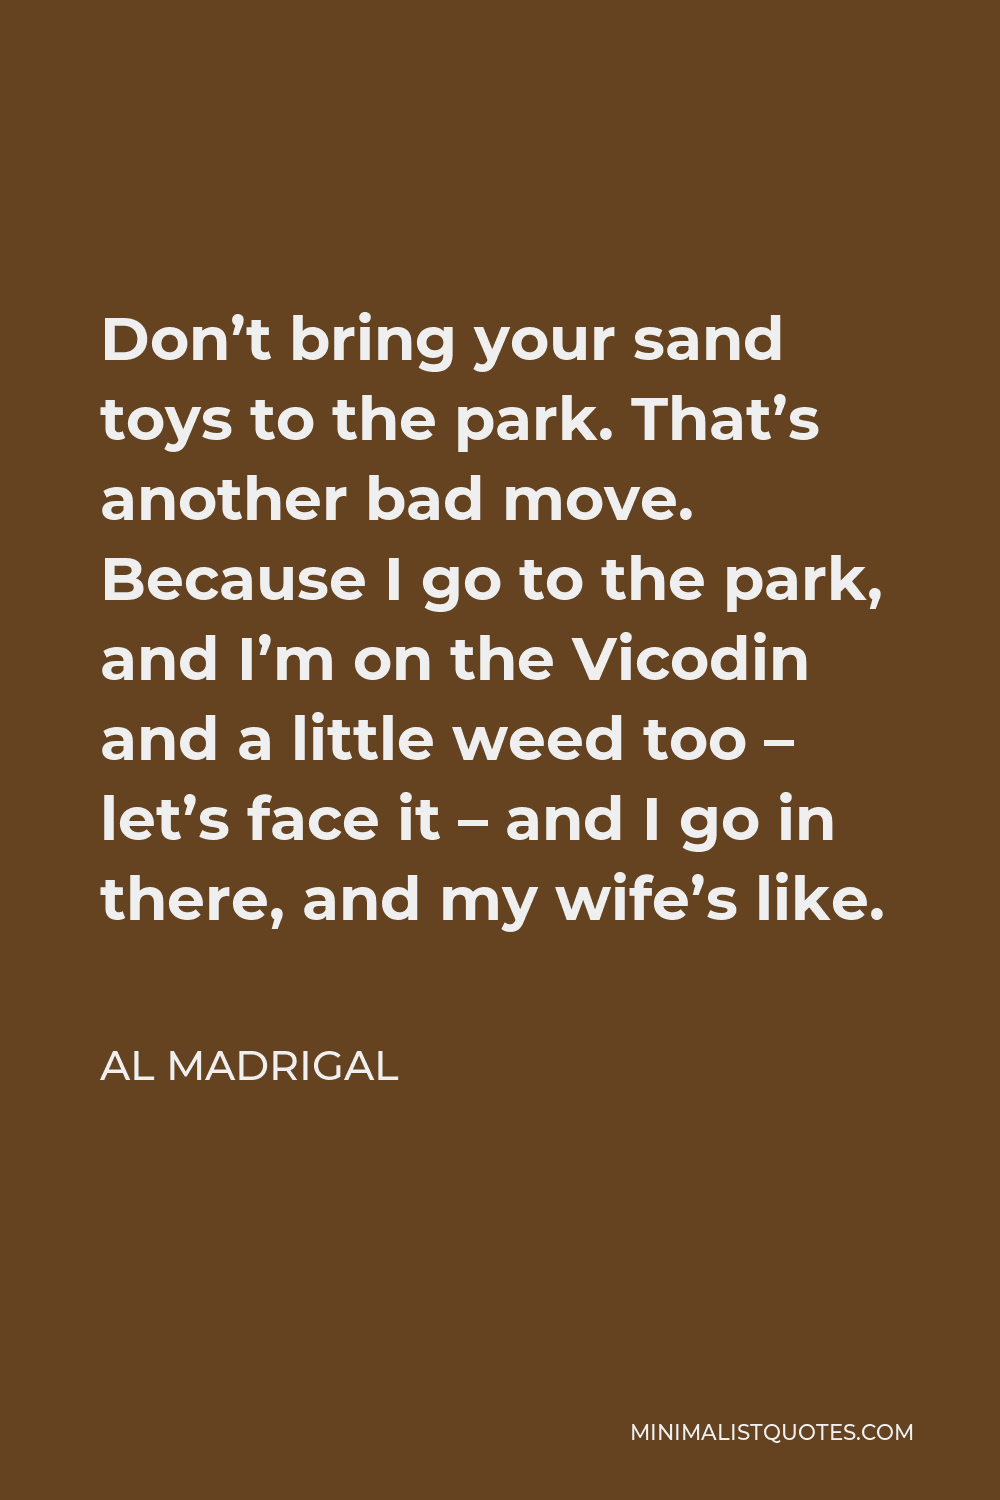 Al Madrigal Quote - Don’t bring your sand toys to the park. That’s another bad move. Because I go to the park, and I’m on the Vicodin and a little weed too – let’s face it – and I go in there, and my wife’s like.